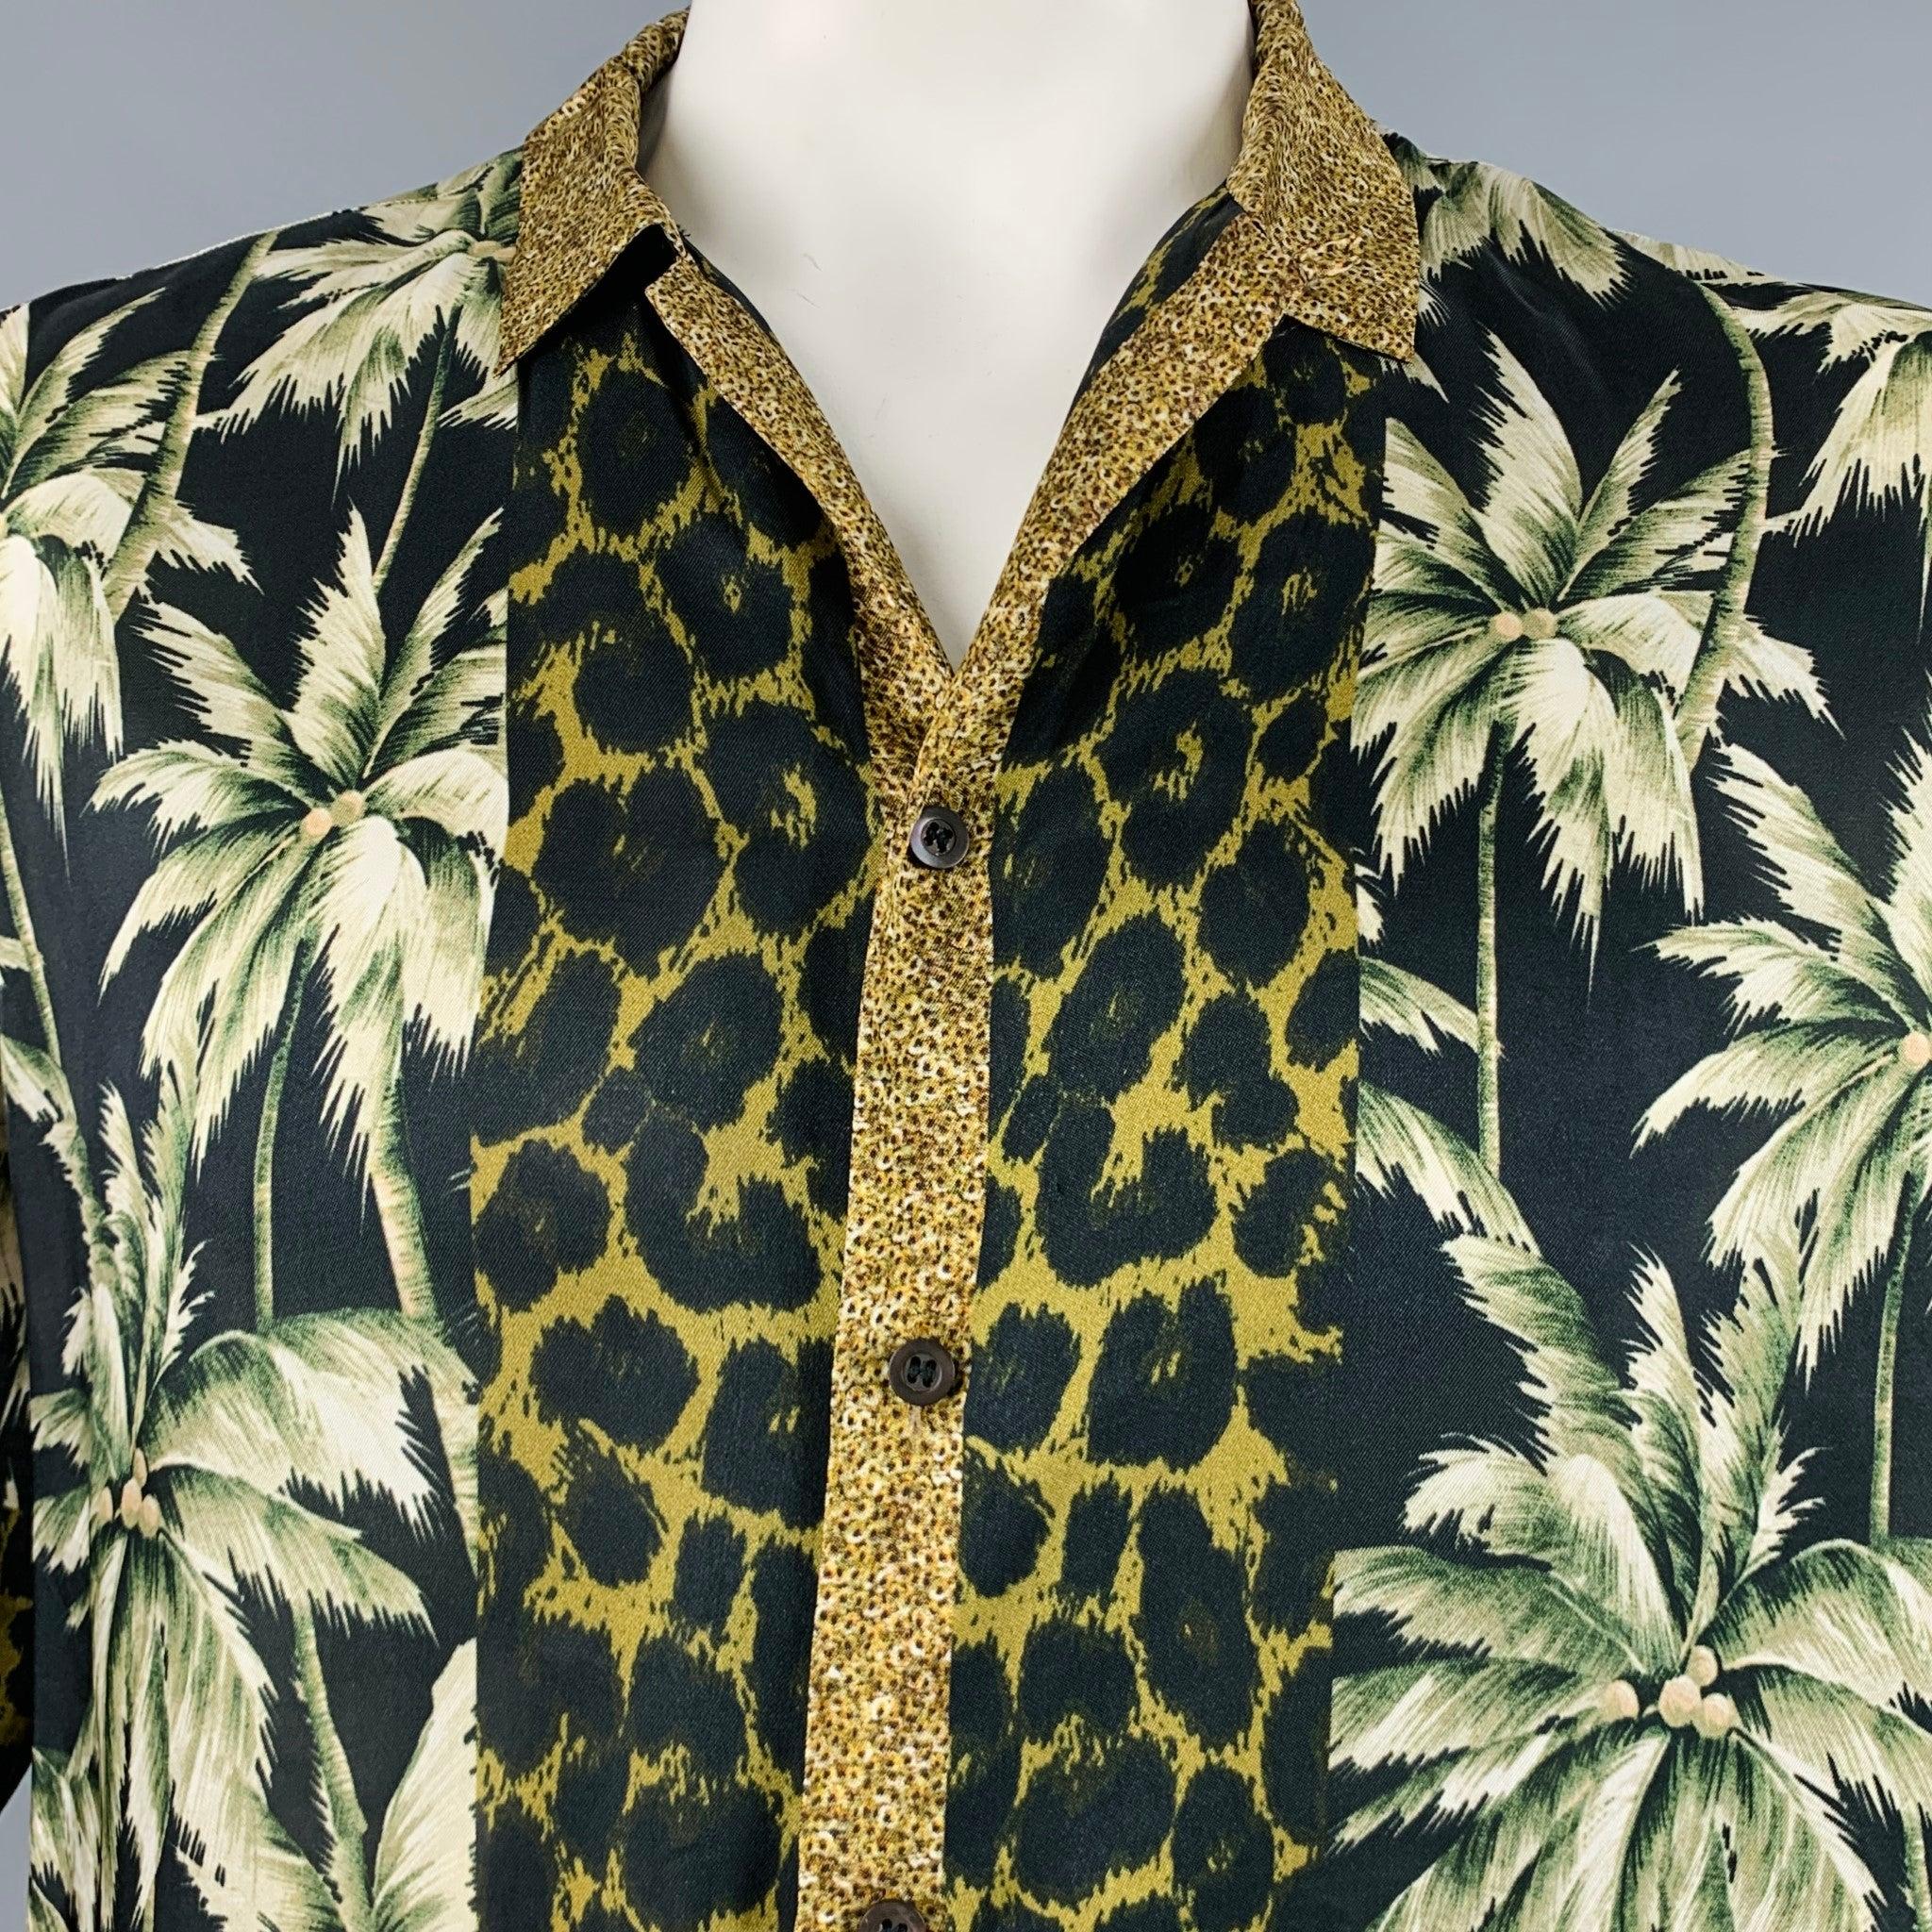 DRIES VAN NOTEN short sleeve shirt
in a black green and brown viscose fabric featuring mixed prints, a camp style, and button closure. Made in Hungary.Excellent Pre-Owned Condition. 

Marked:   54 

Measurements: 
 
Shoulder: 17 inches Chest: 46